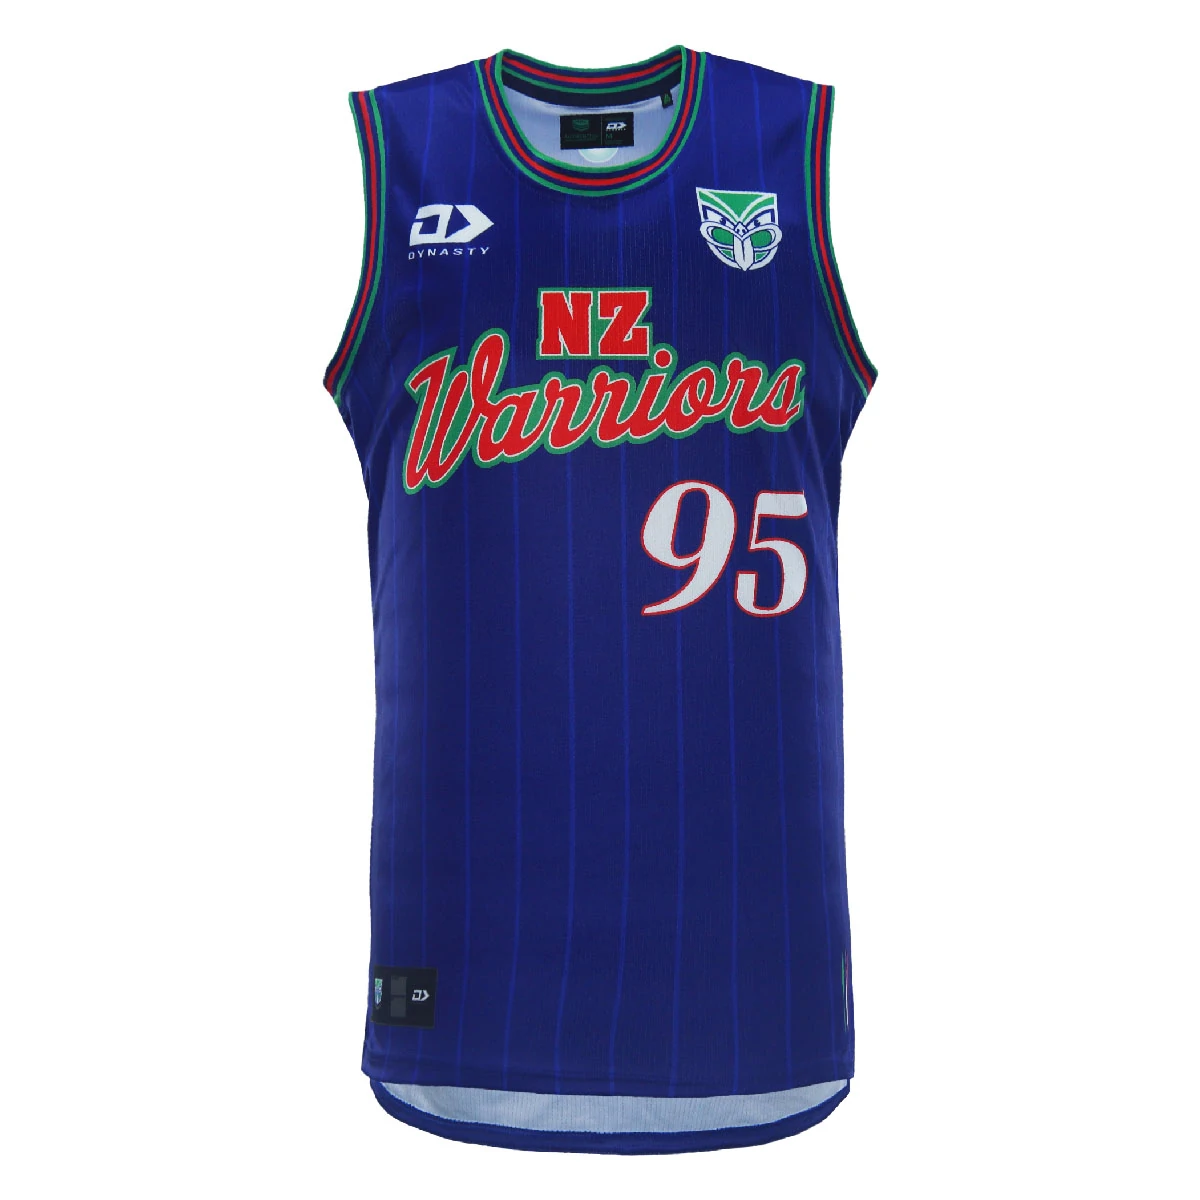 Front view of 2024 New Zealand Warriors men's royal basketball singlet